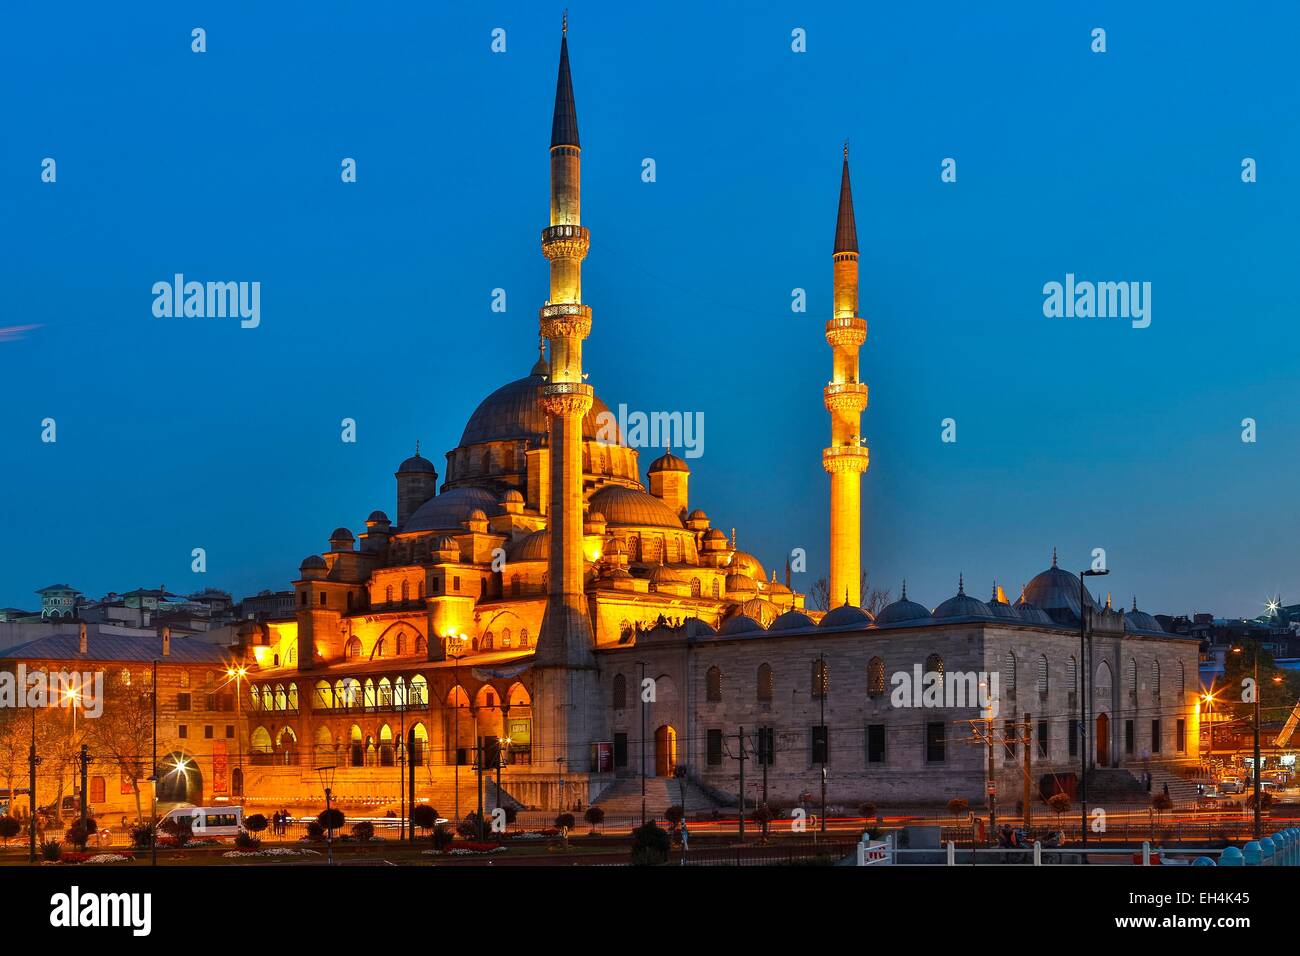 https://c8.alamy.com/comp/EH4K45/turkey-istanbul-historical-centre-listed-as-world-heritage-by-unesco-EH4K45.jpg